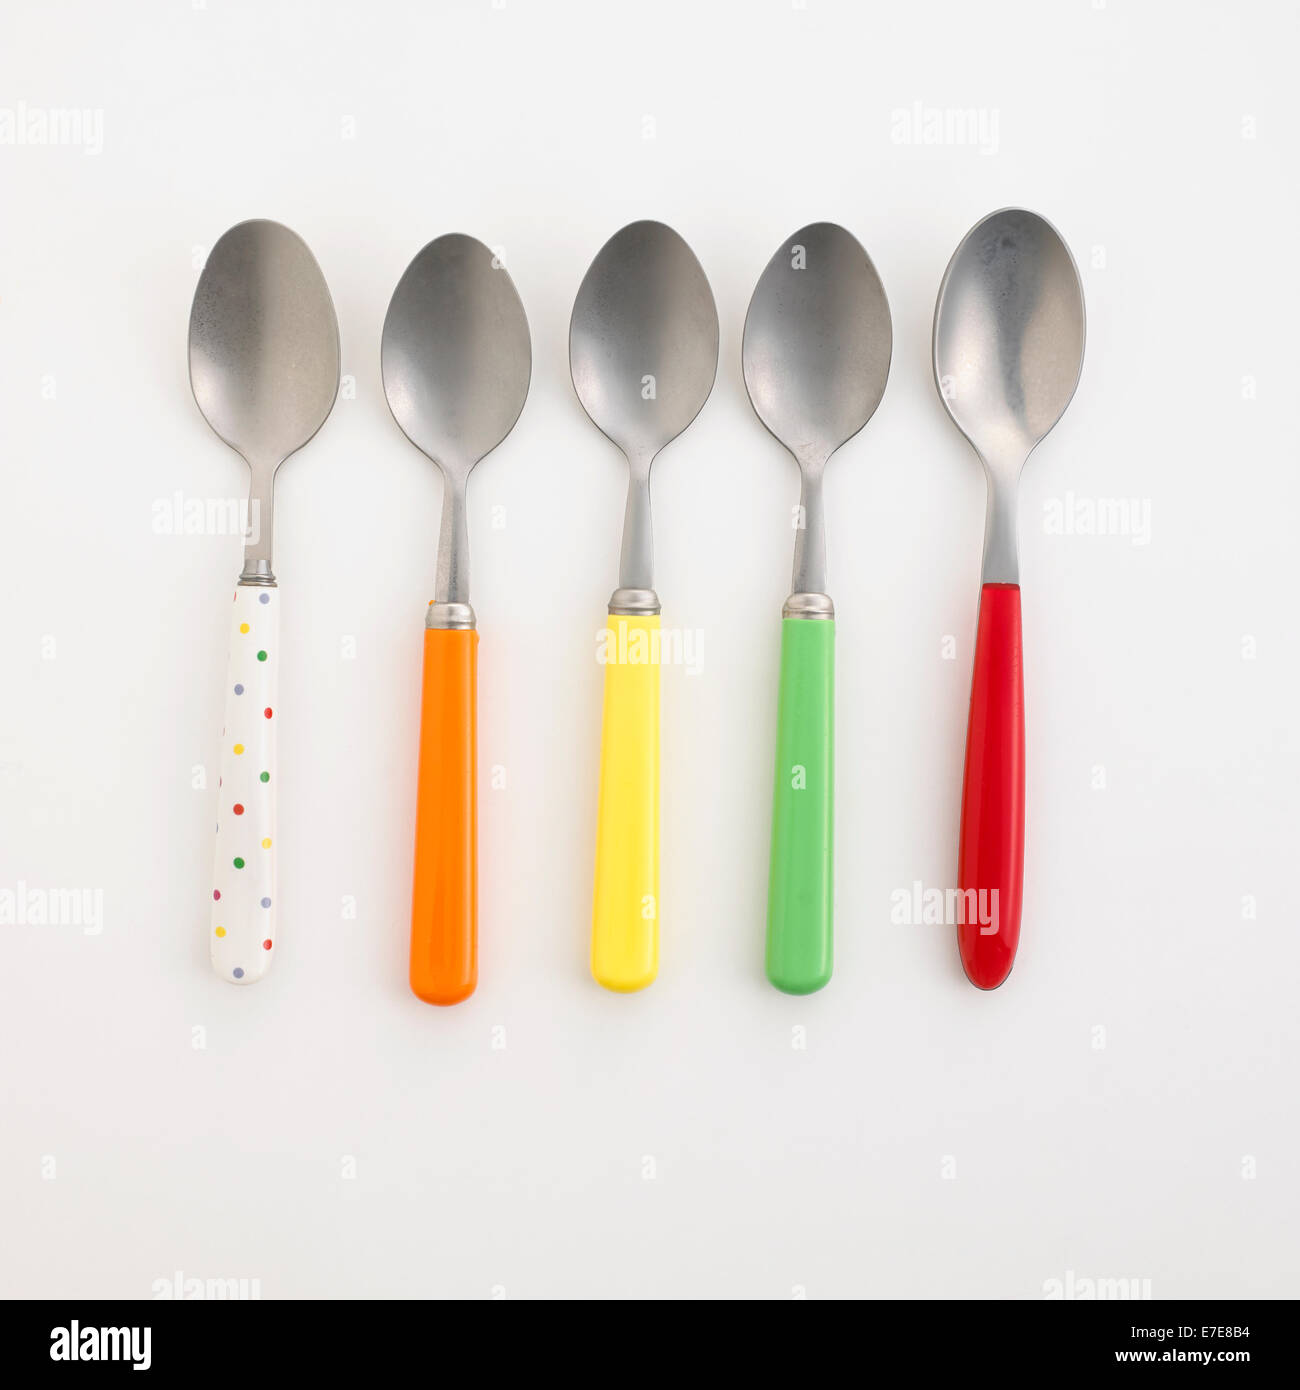 Row of Teaspoons with colored handles Stock Photo